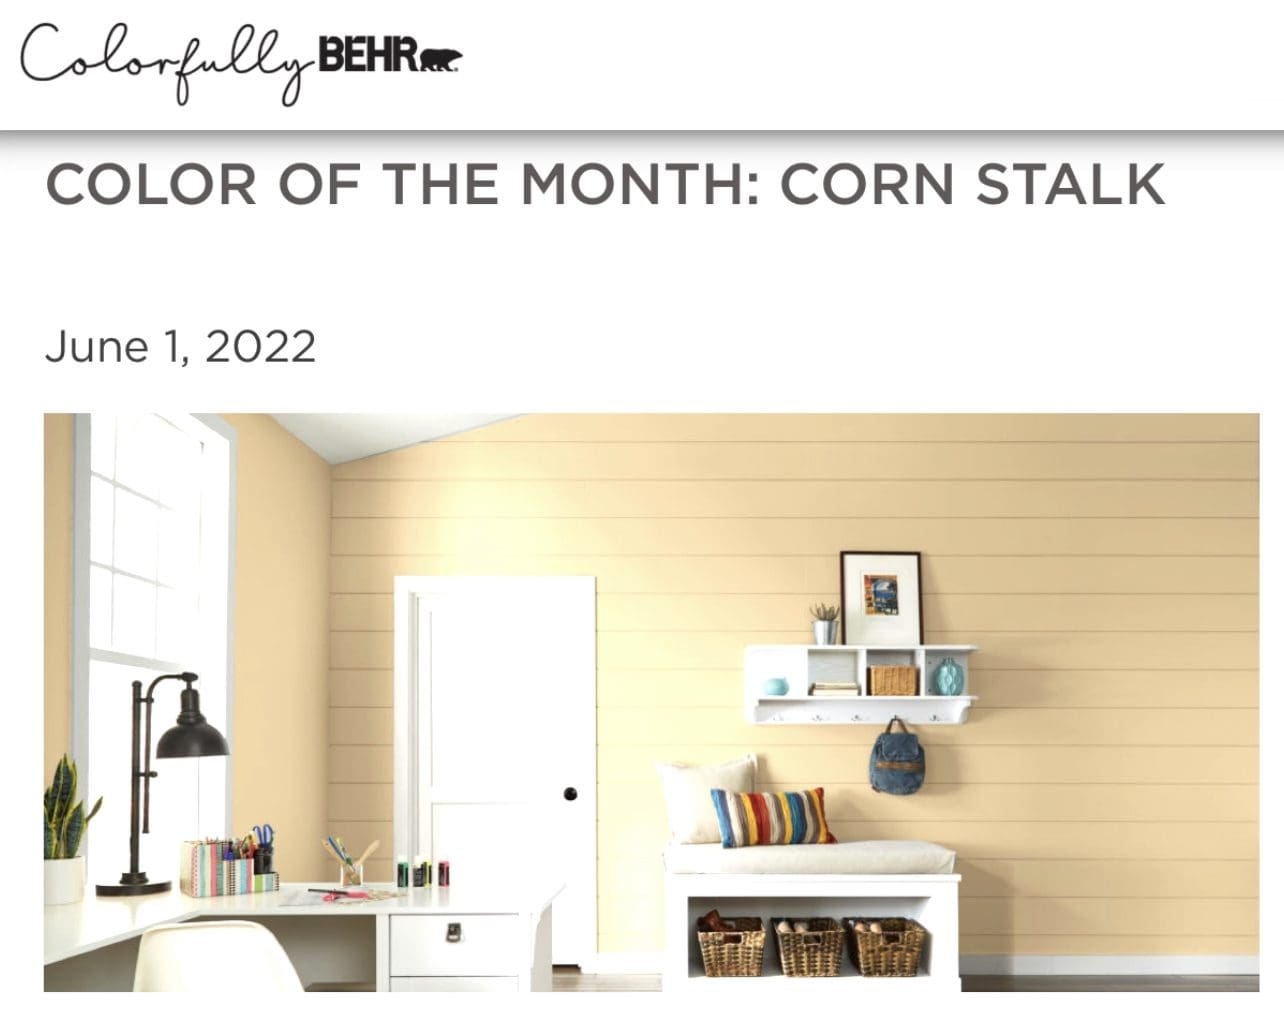 Behr Color of the Month June 2022